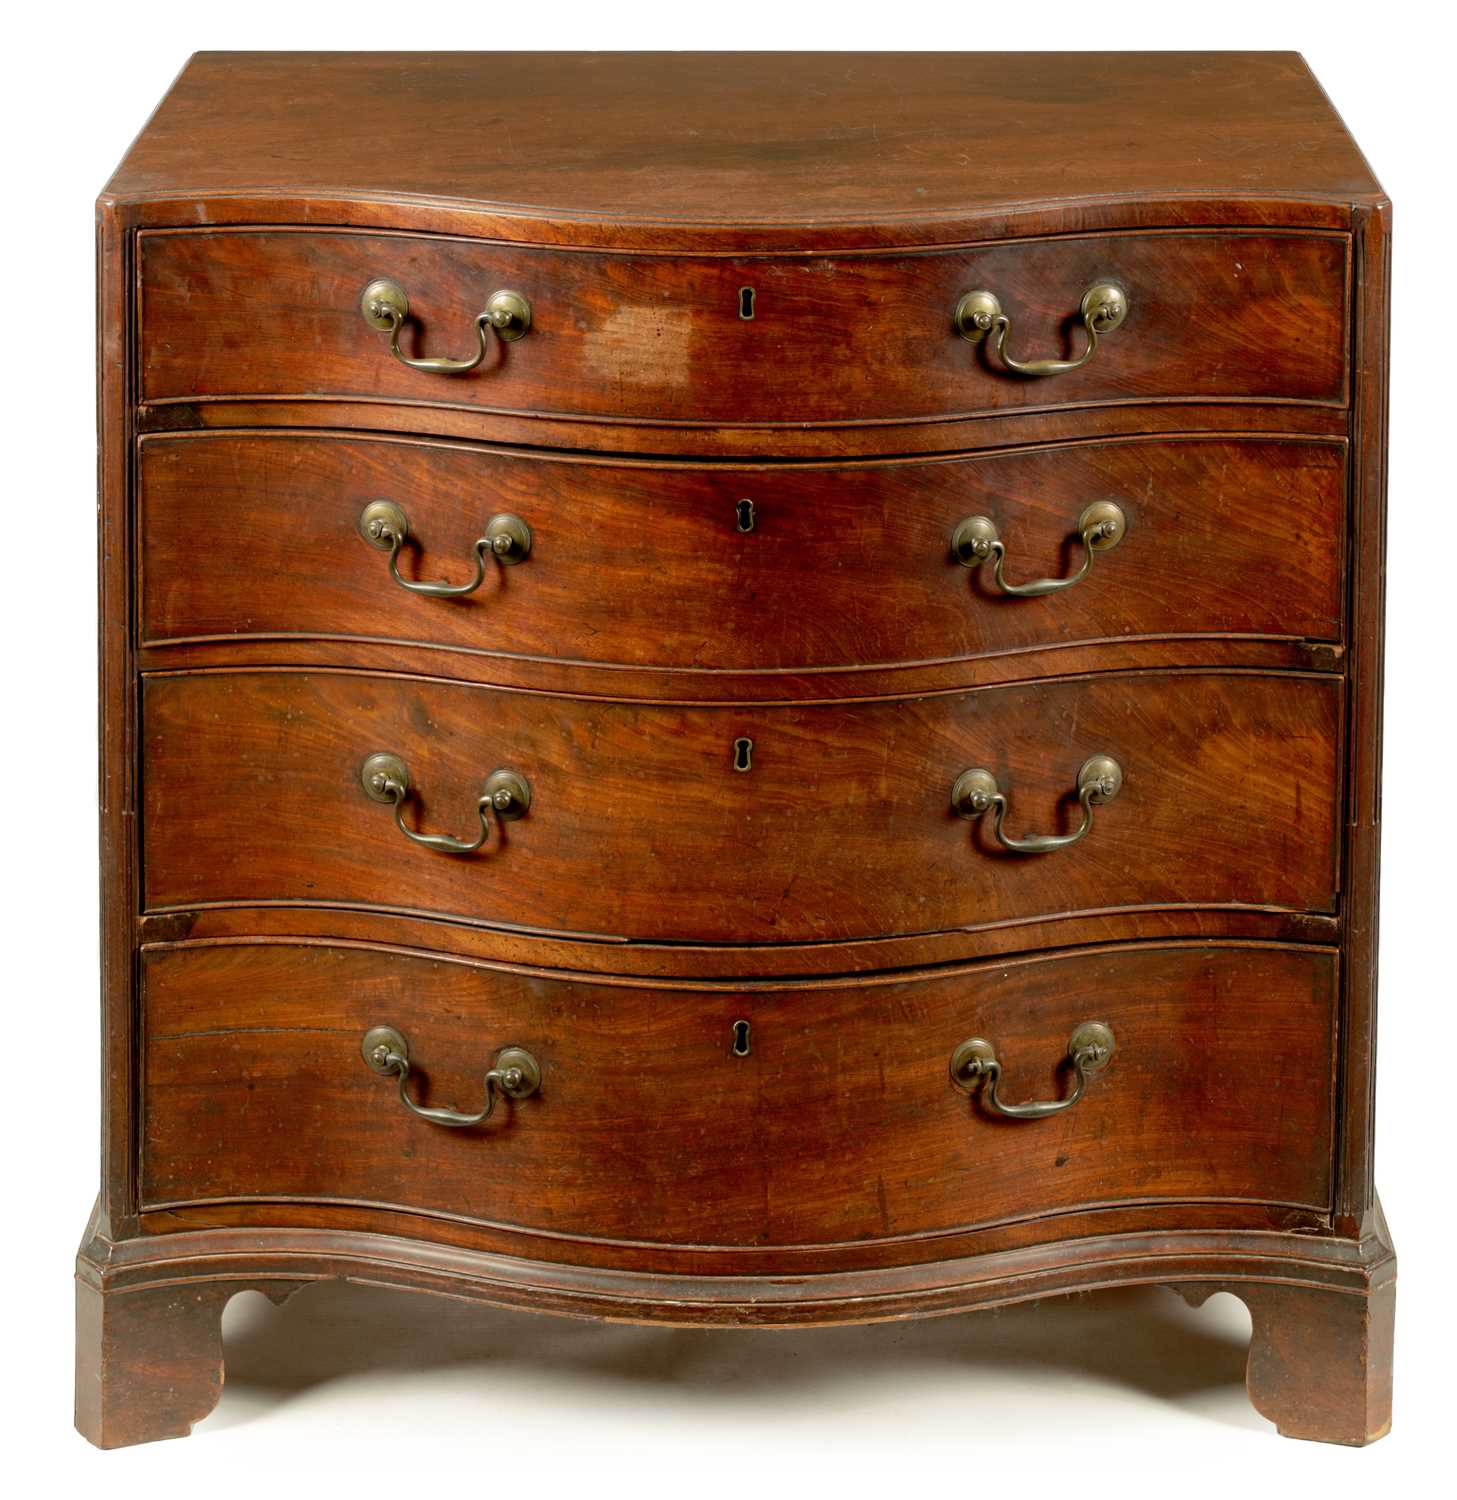 Lot 1087 - A GOOD GEORGE III FIGURED MAHOGANY SERPENTINE CADDY TOP CHEST OF DRAWERS